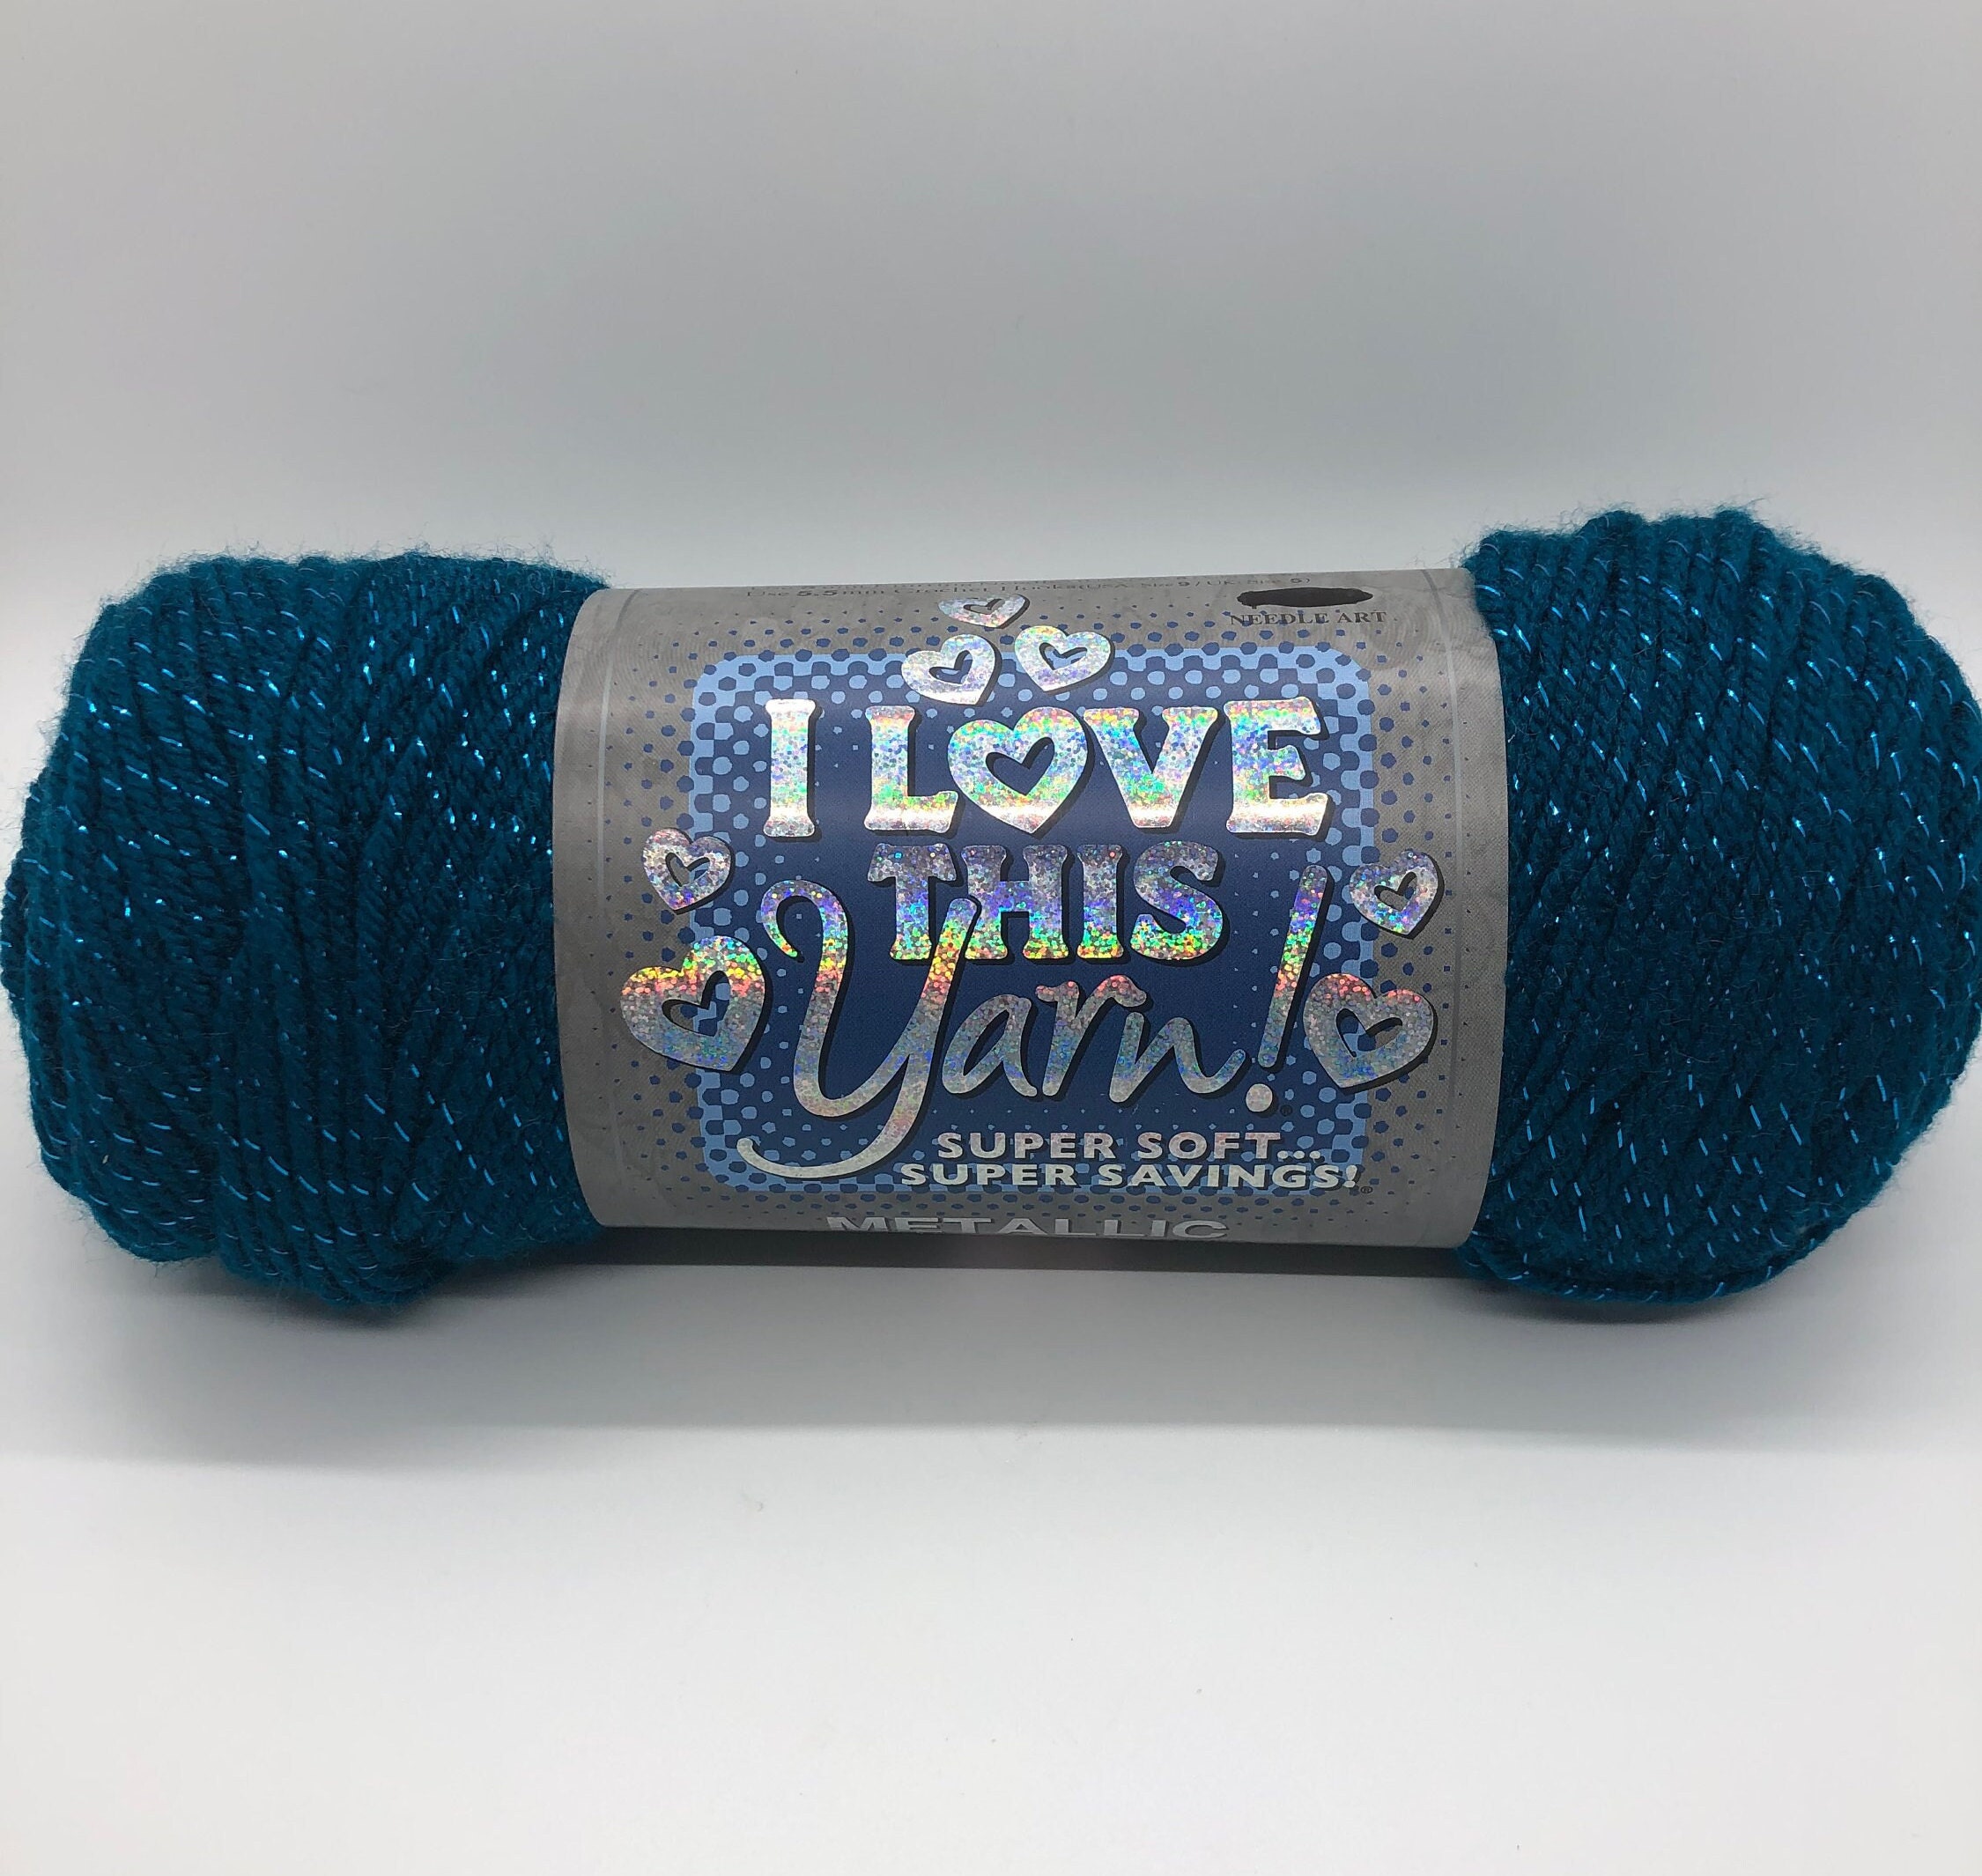 Hobby Lobby - For on-trend colors, soft-as-can-be skeins and a